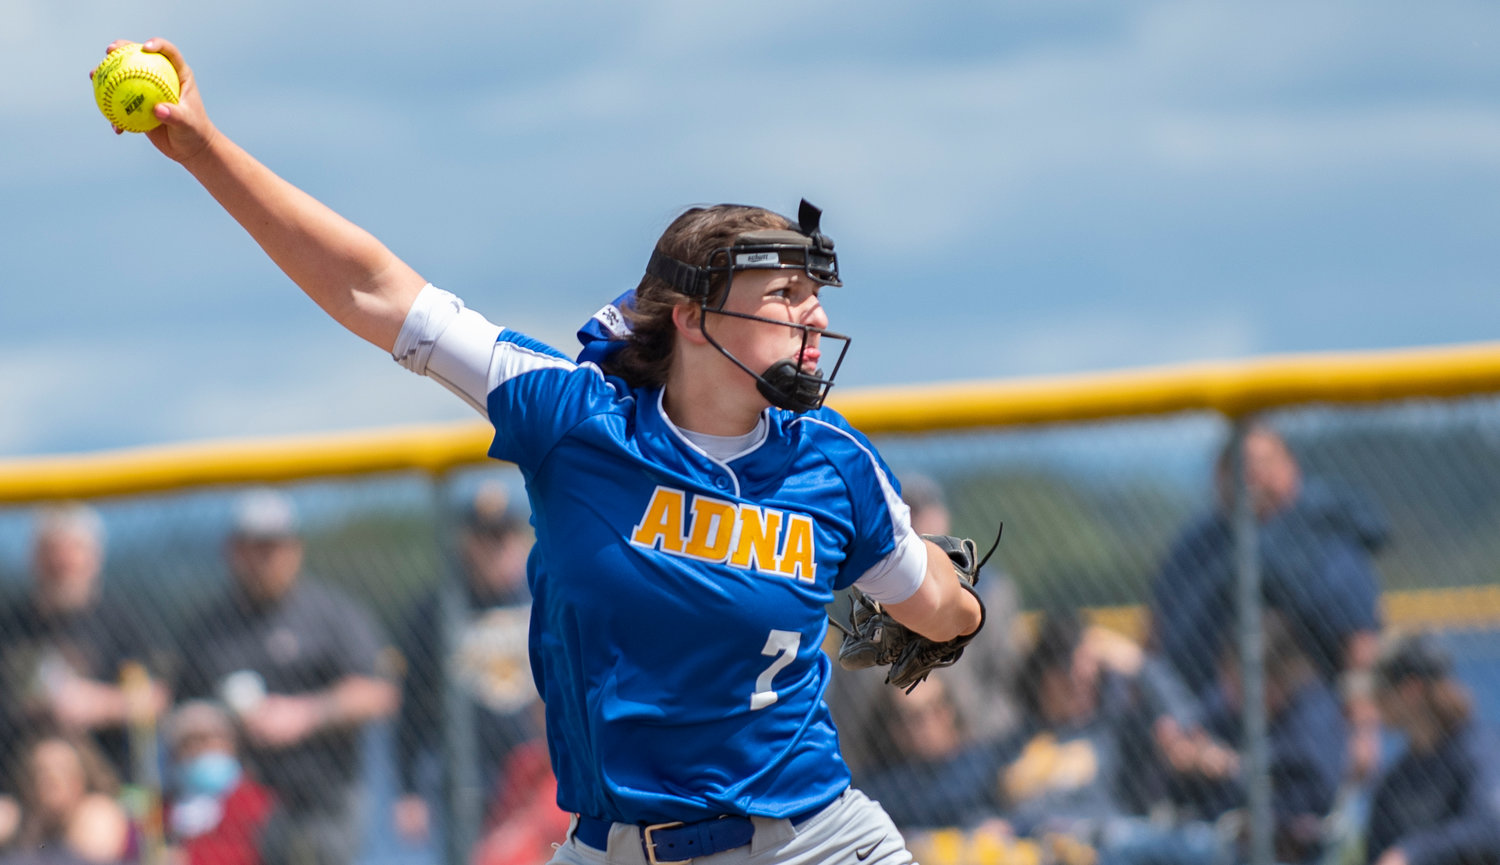 Adna senior ace Haley Rainey winds up to deliver a pitch to a Forks batter on Saturday.